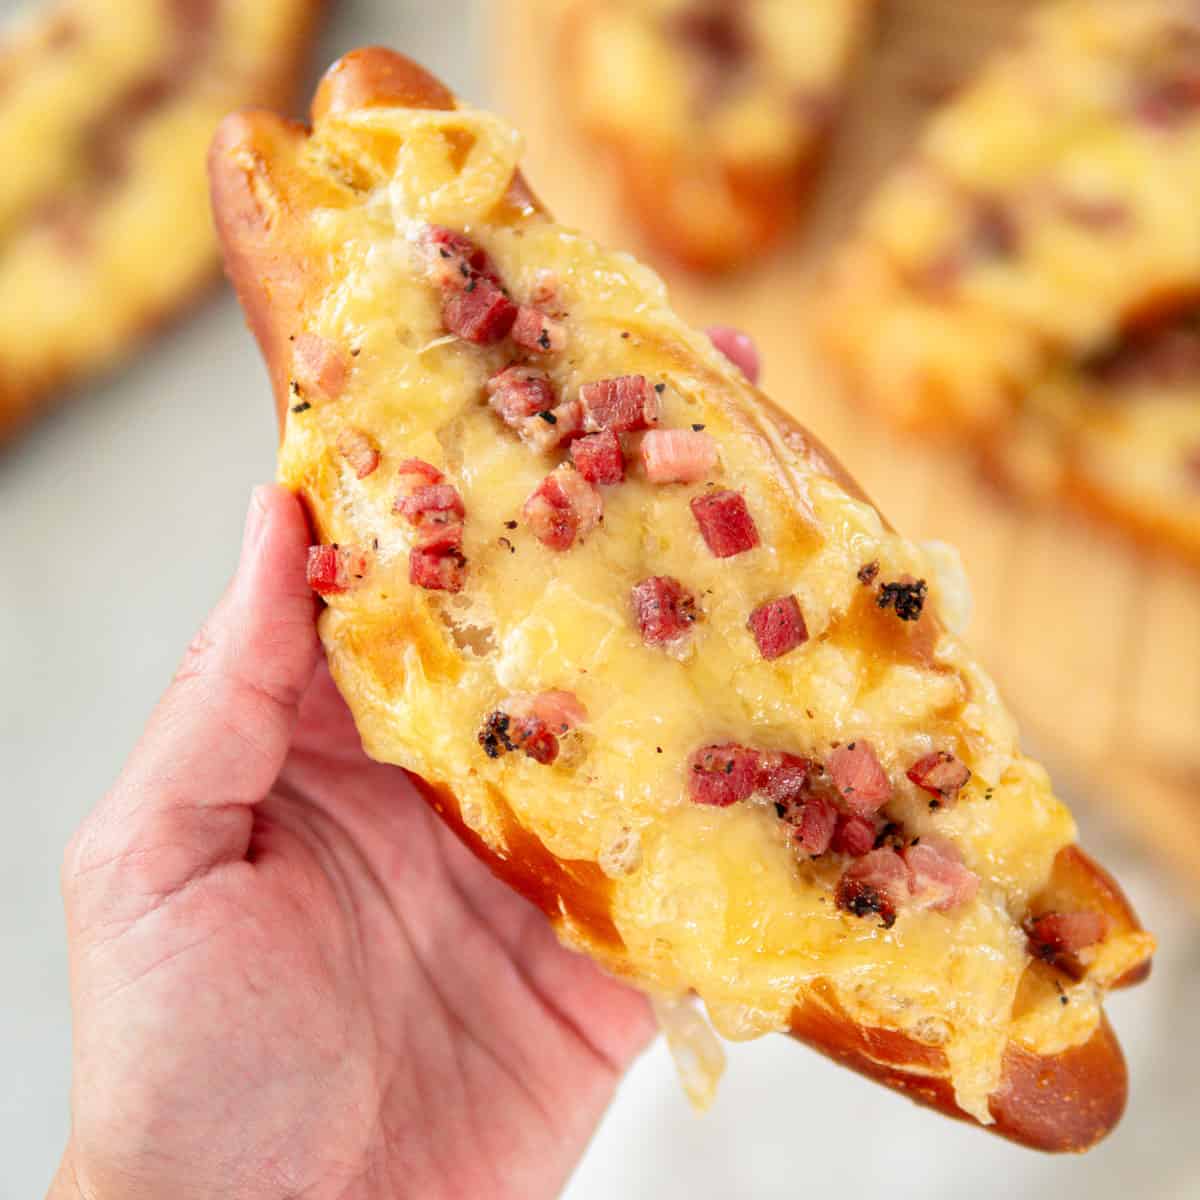 holding a soft baked pretzels with bacon and cheese